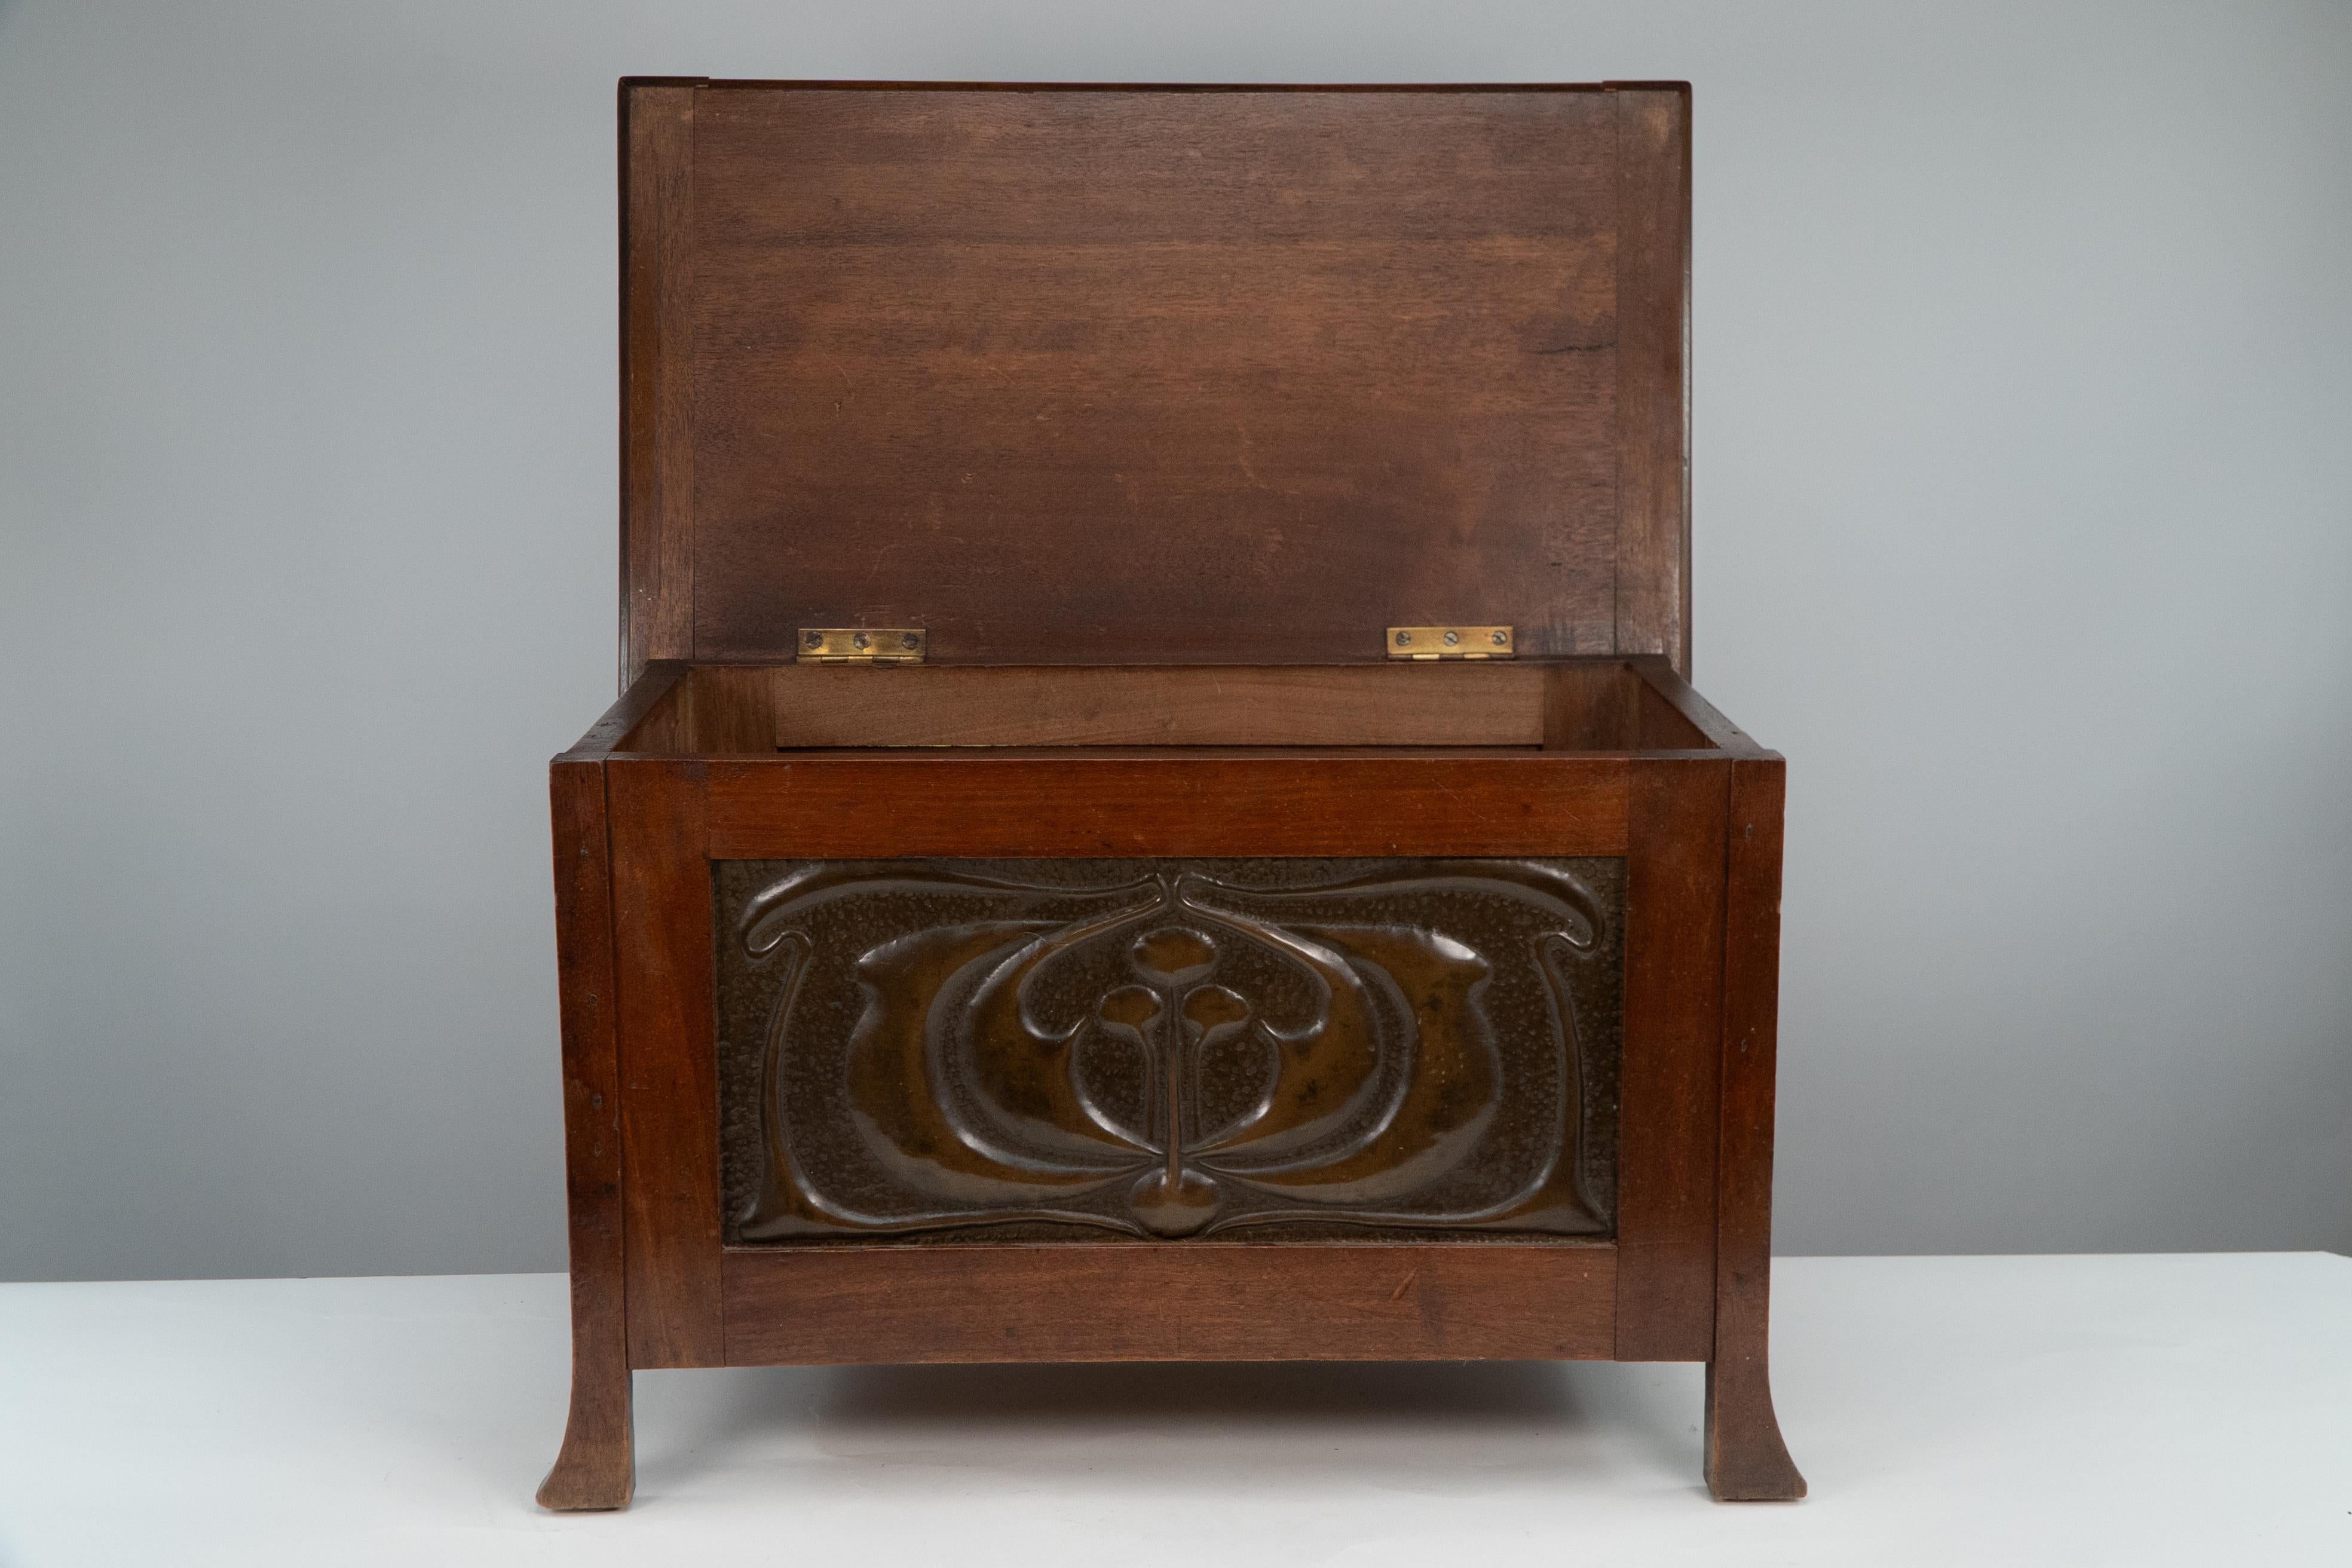 Liberty & Co, in the Glasgow Style. A small trunk or toybox with floral copper panels to the front and sides that are in the style of C R Mackintosh.